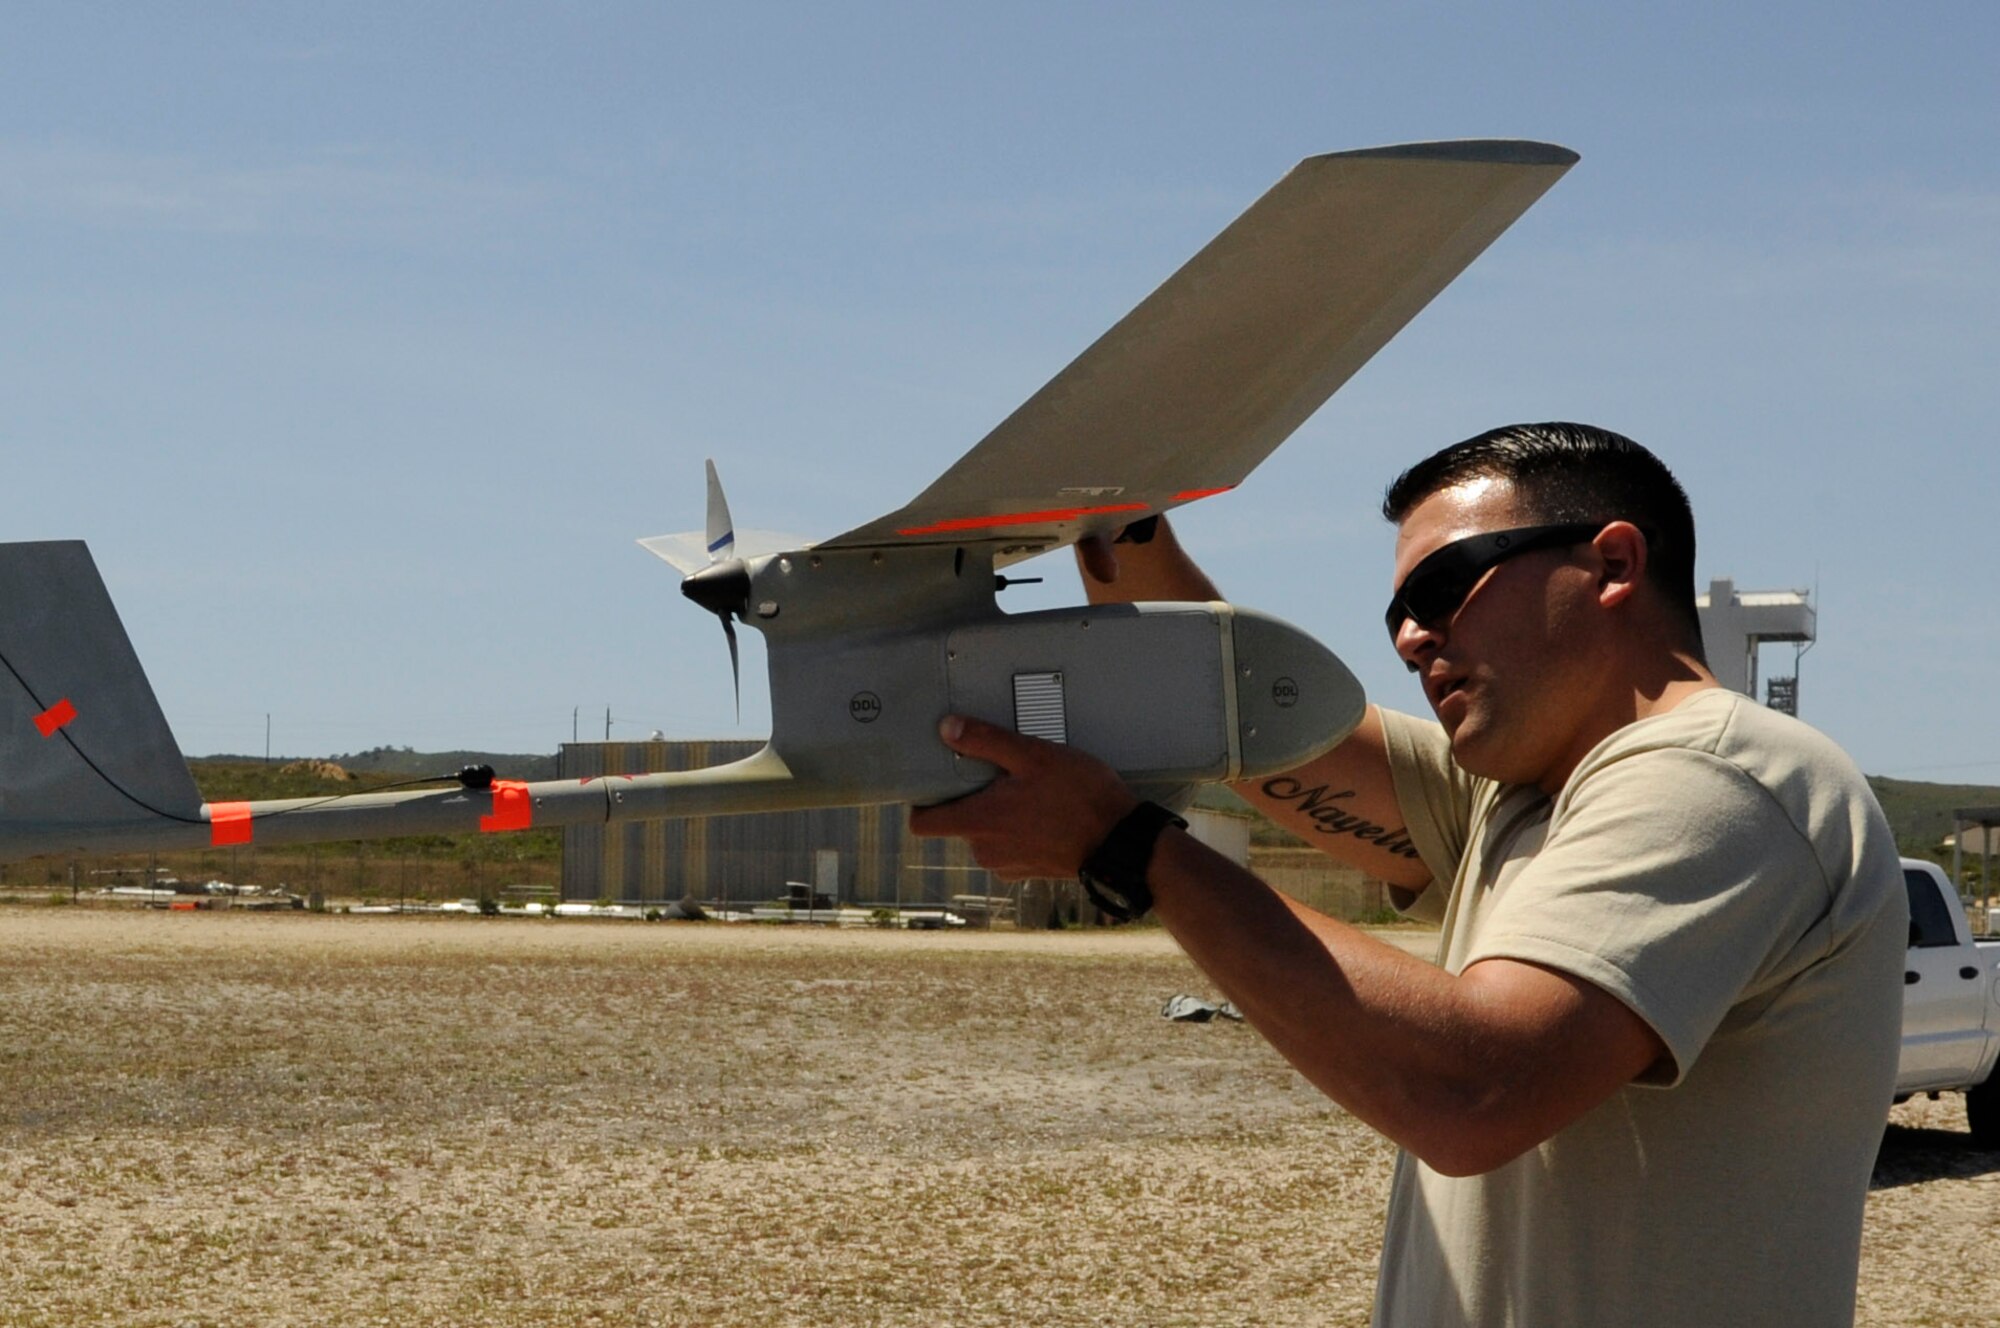 Staff Sgt. William Huster inspects a type of unmanned aerial vehicle, known as Raven-B/DDL, April 30, 2014, at Vandenberg Air Force Base, Calif. With an aim to enhance comprehensive base safety and security, the 30th Security Forces Squadron is bolstering its Small Unmanned Aircraft System program. Huster is the 30th SFS NCO in-charge of force protection and intelligence. (U.S. Air Force photo/Senior Airman Shane Phipps) 